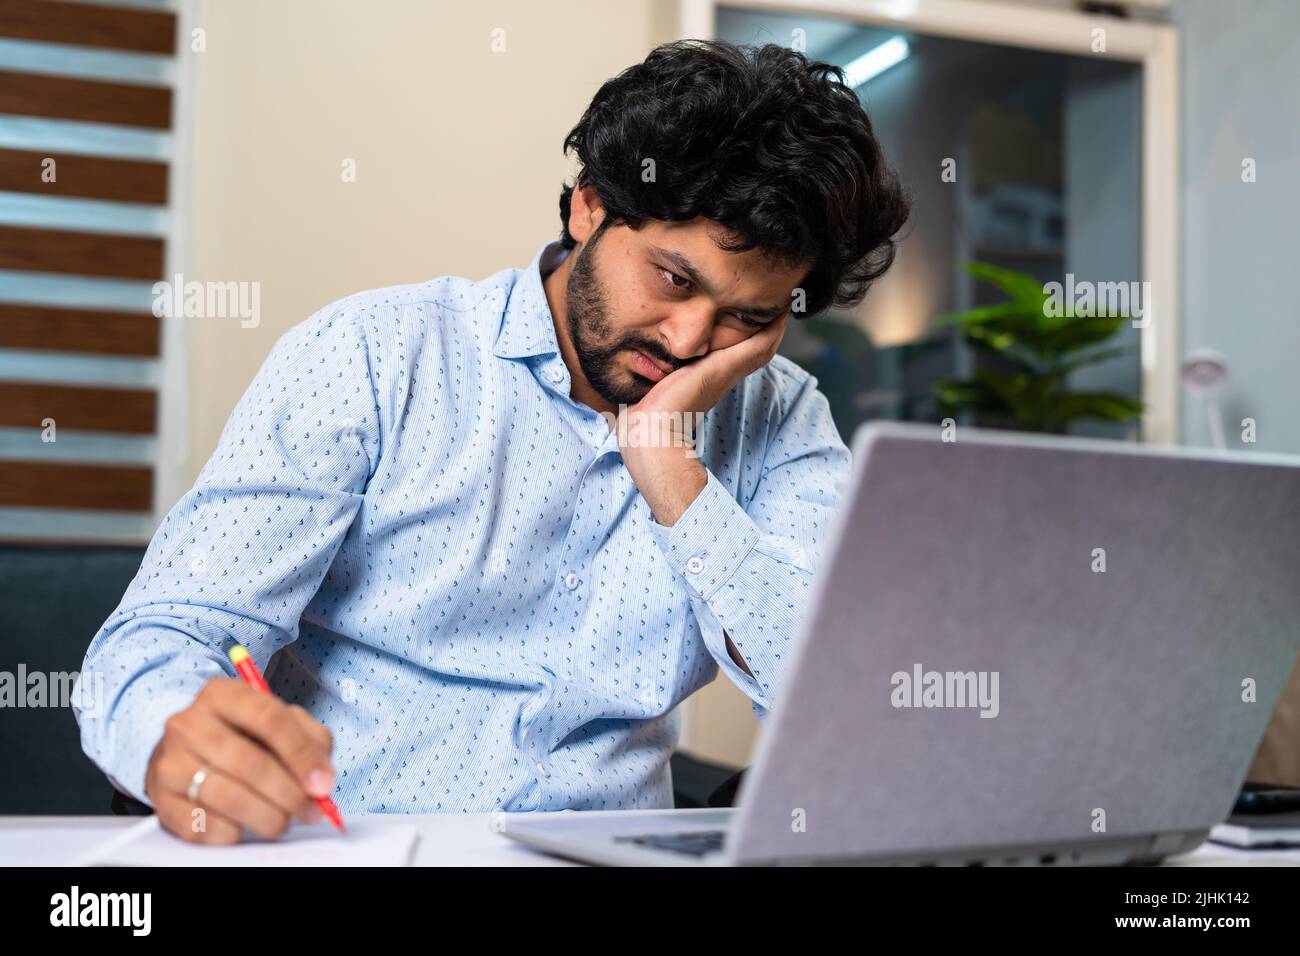 Tired young man while working on laptop by taking notes at office desk - concept of job frustration, routine work life and exhaustion. Stock Photo